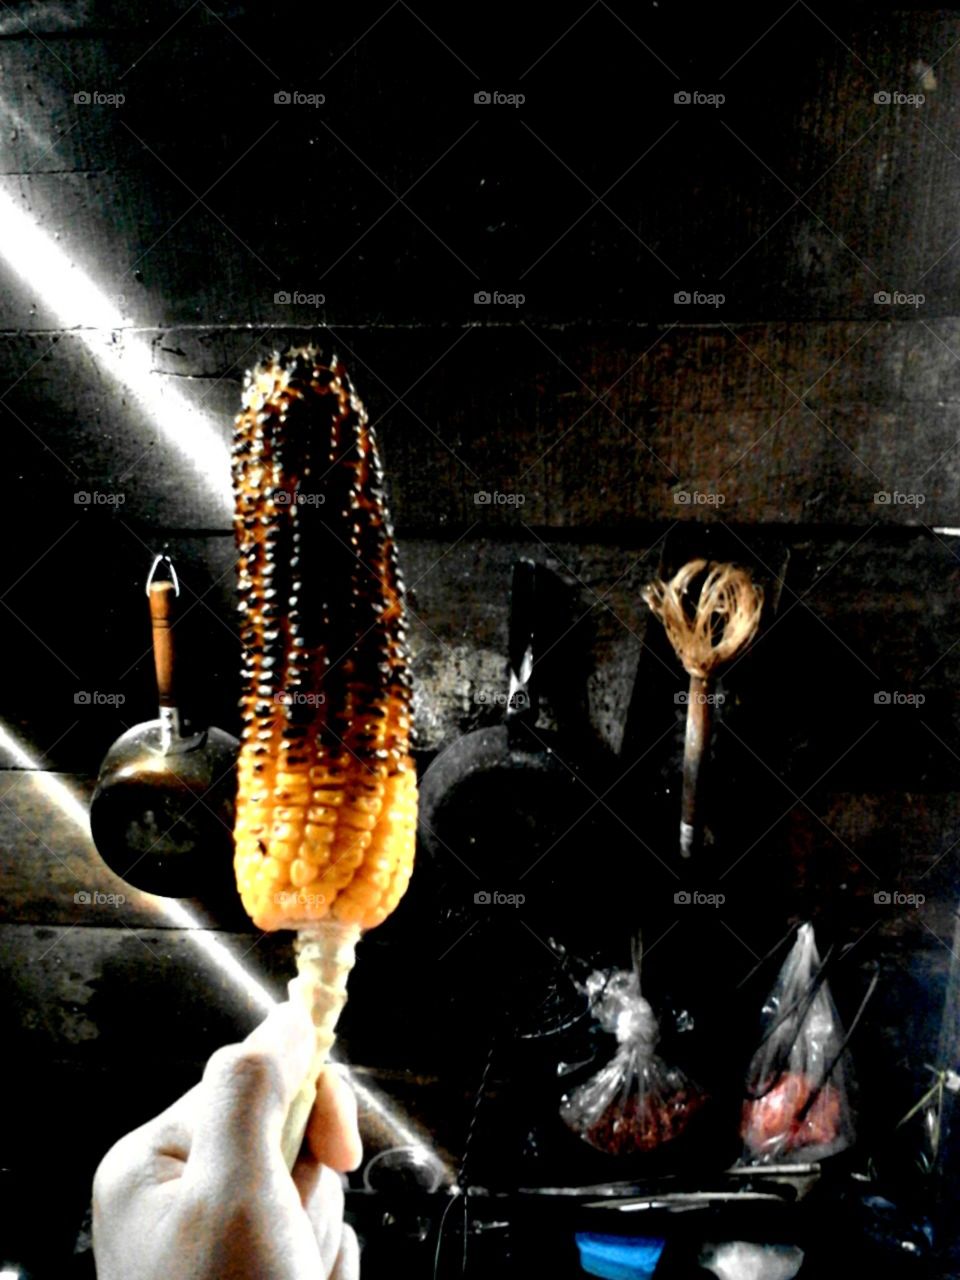 the real roasted corn